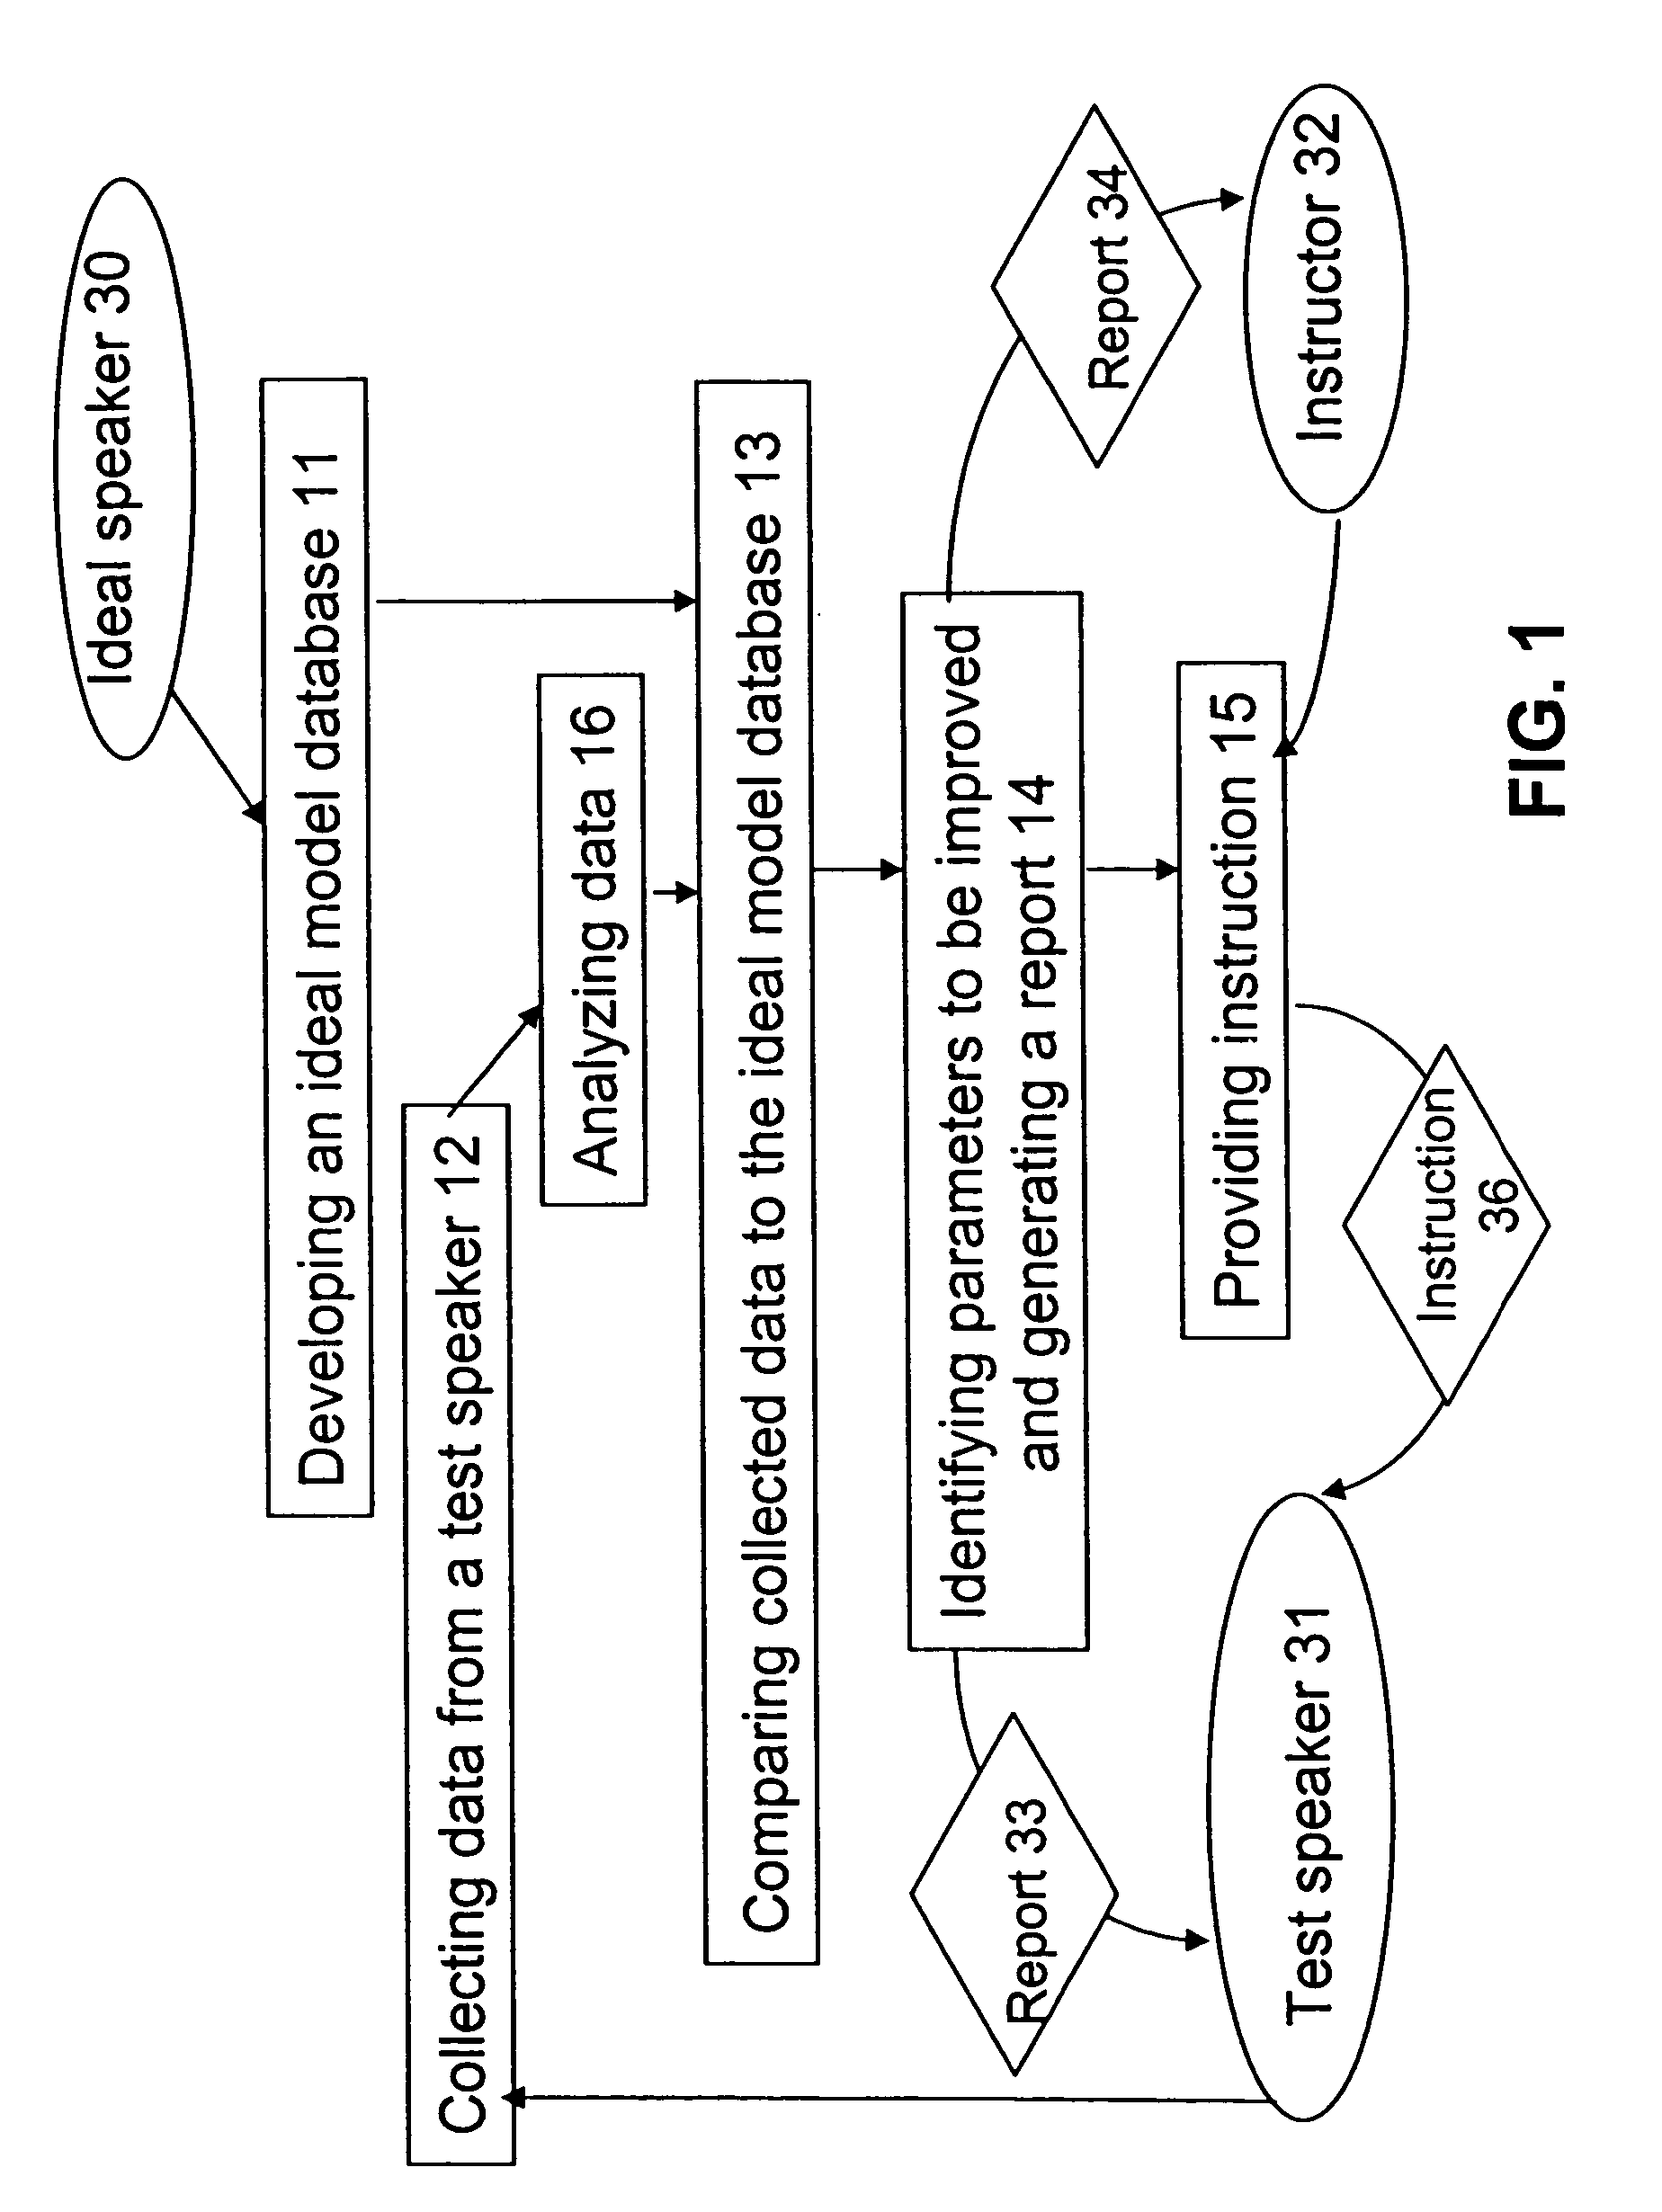 System and process for feedback speech instruction